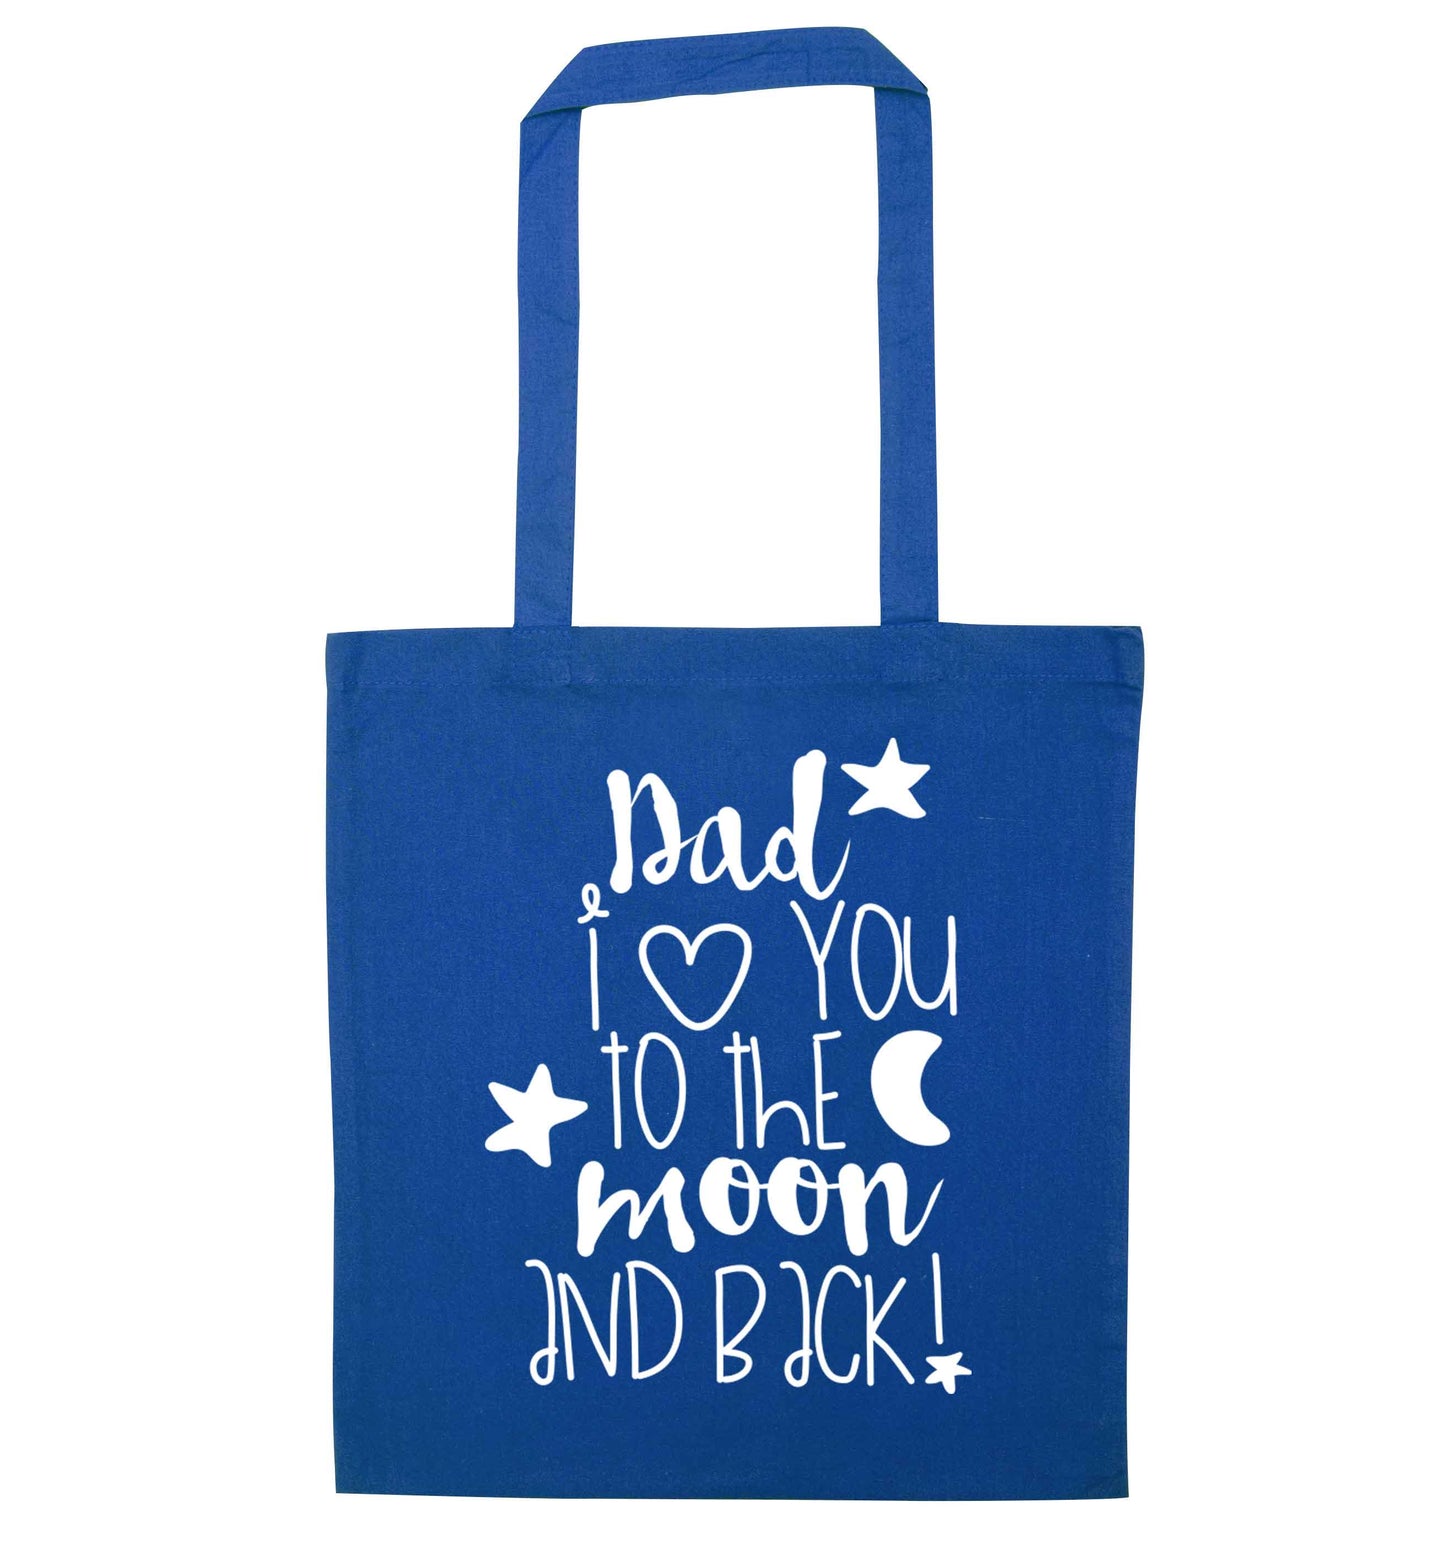 Dad I love you to the moon and back blue tote bag